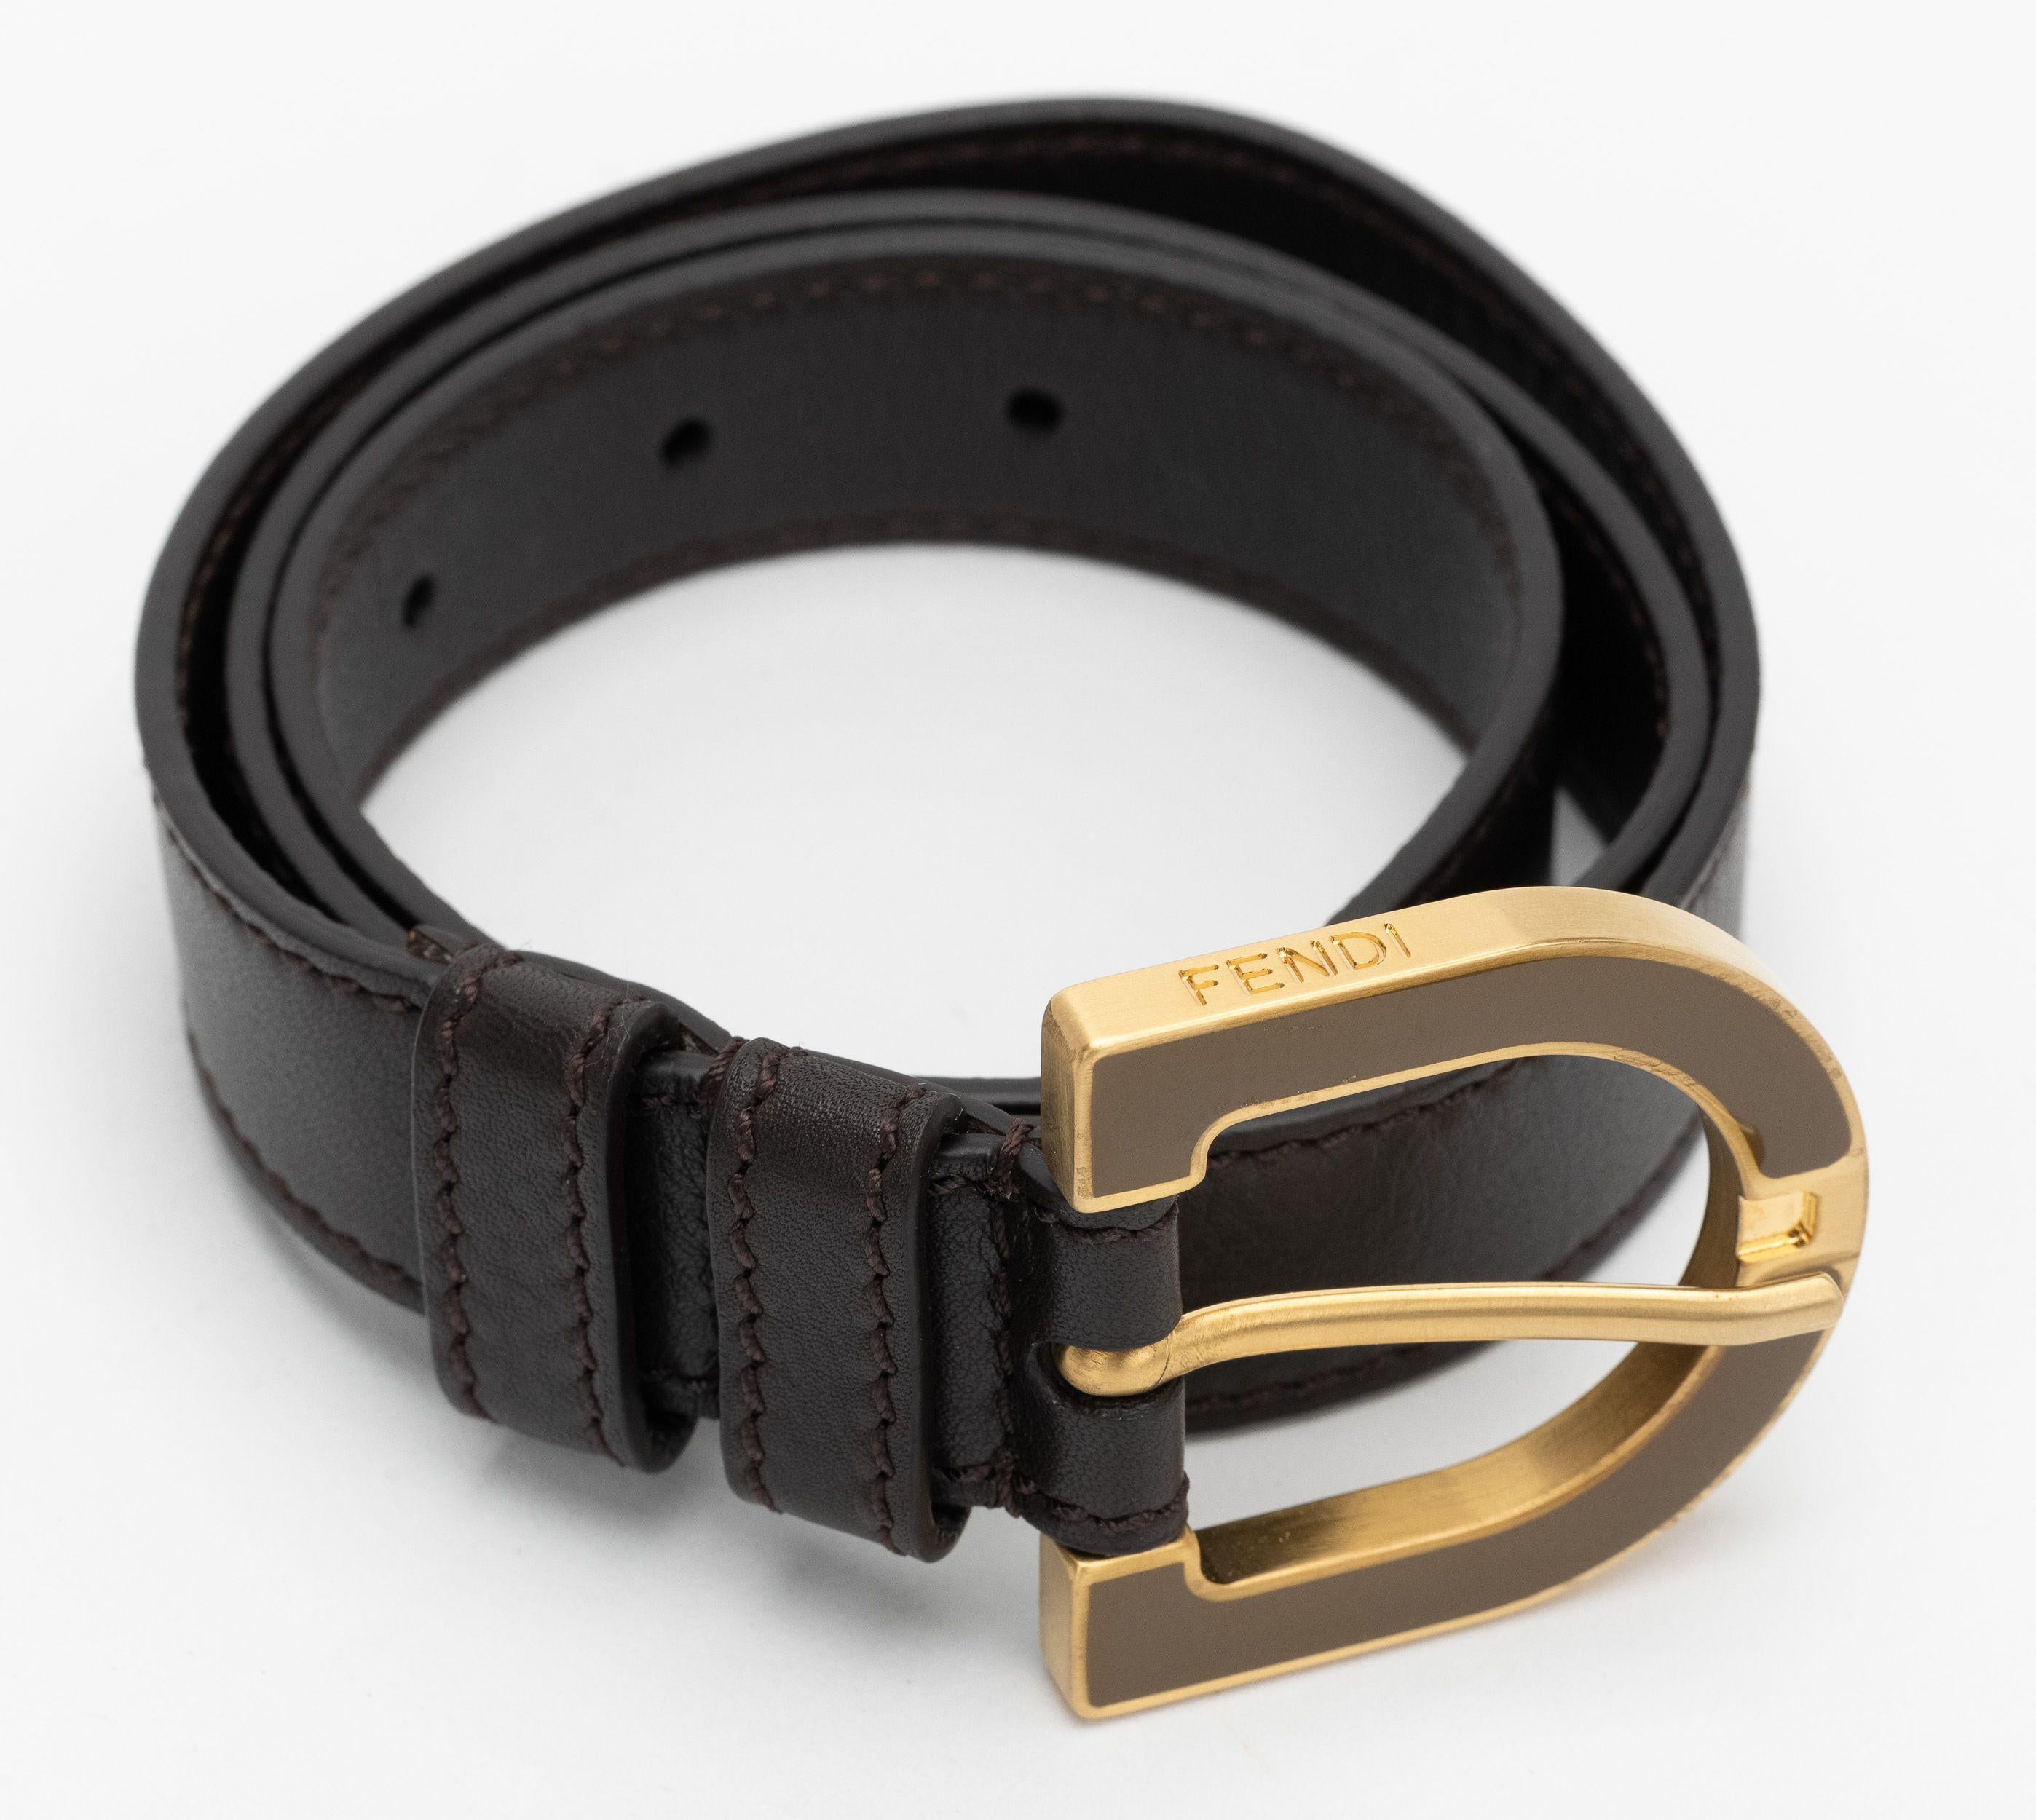 Fendi New Brown Leather Belt 83 cm In New Condition For Sale In West Hollywood, CA